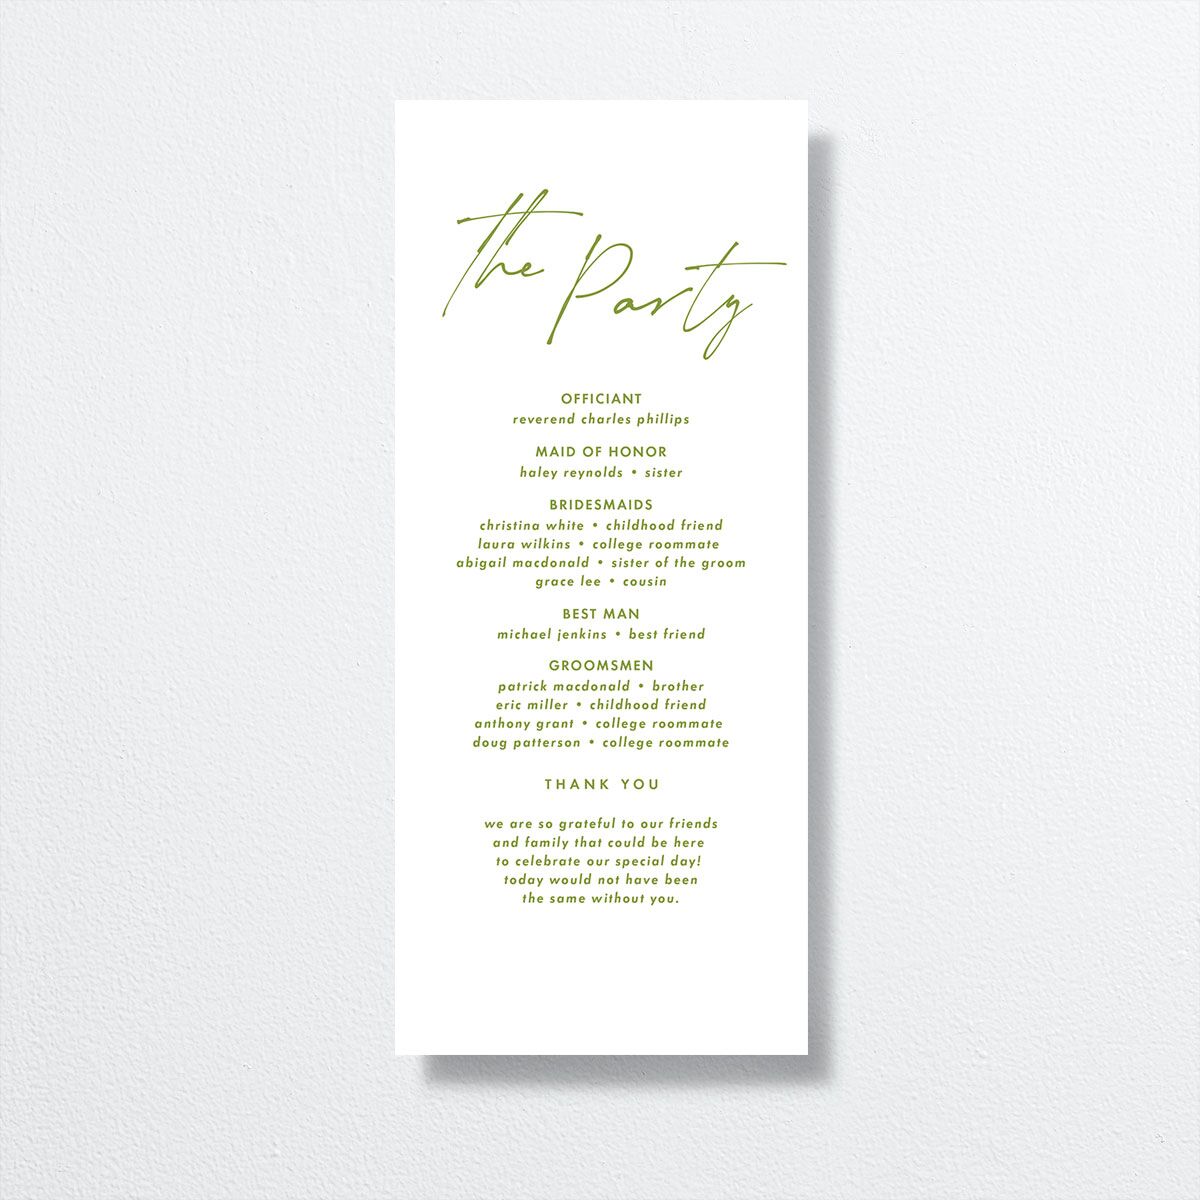 Picture This Wedding Programs back in green